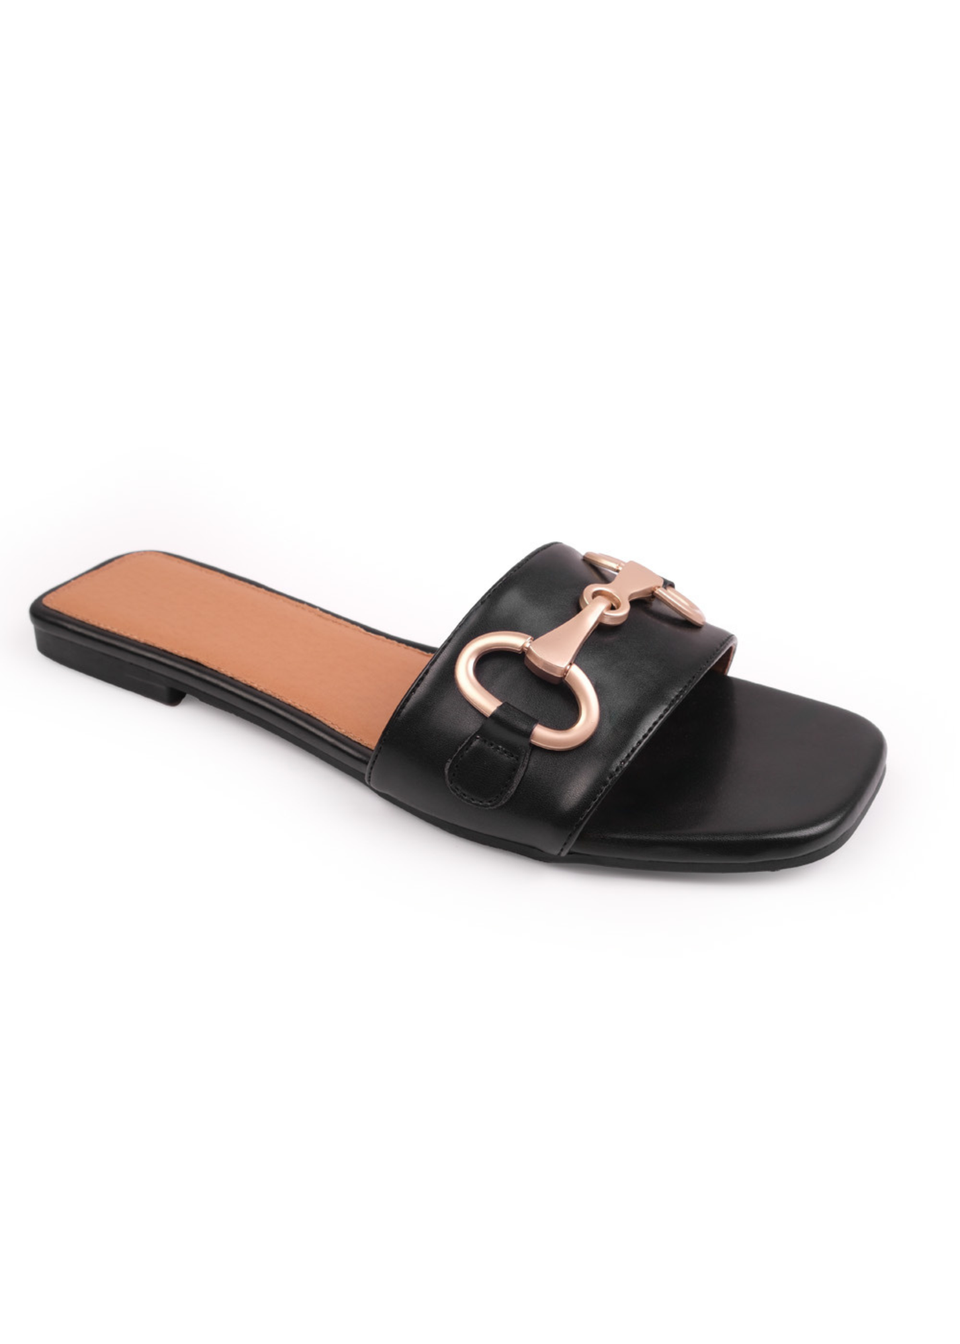 Where's That From Black Pu Orca Flat Sandals With Buckle Detail